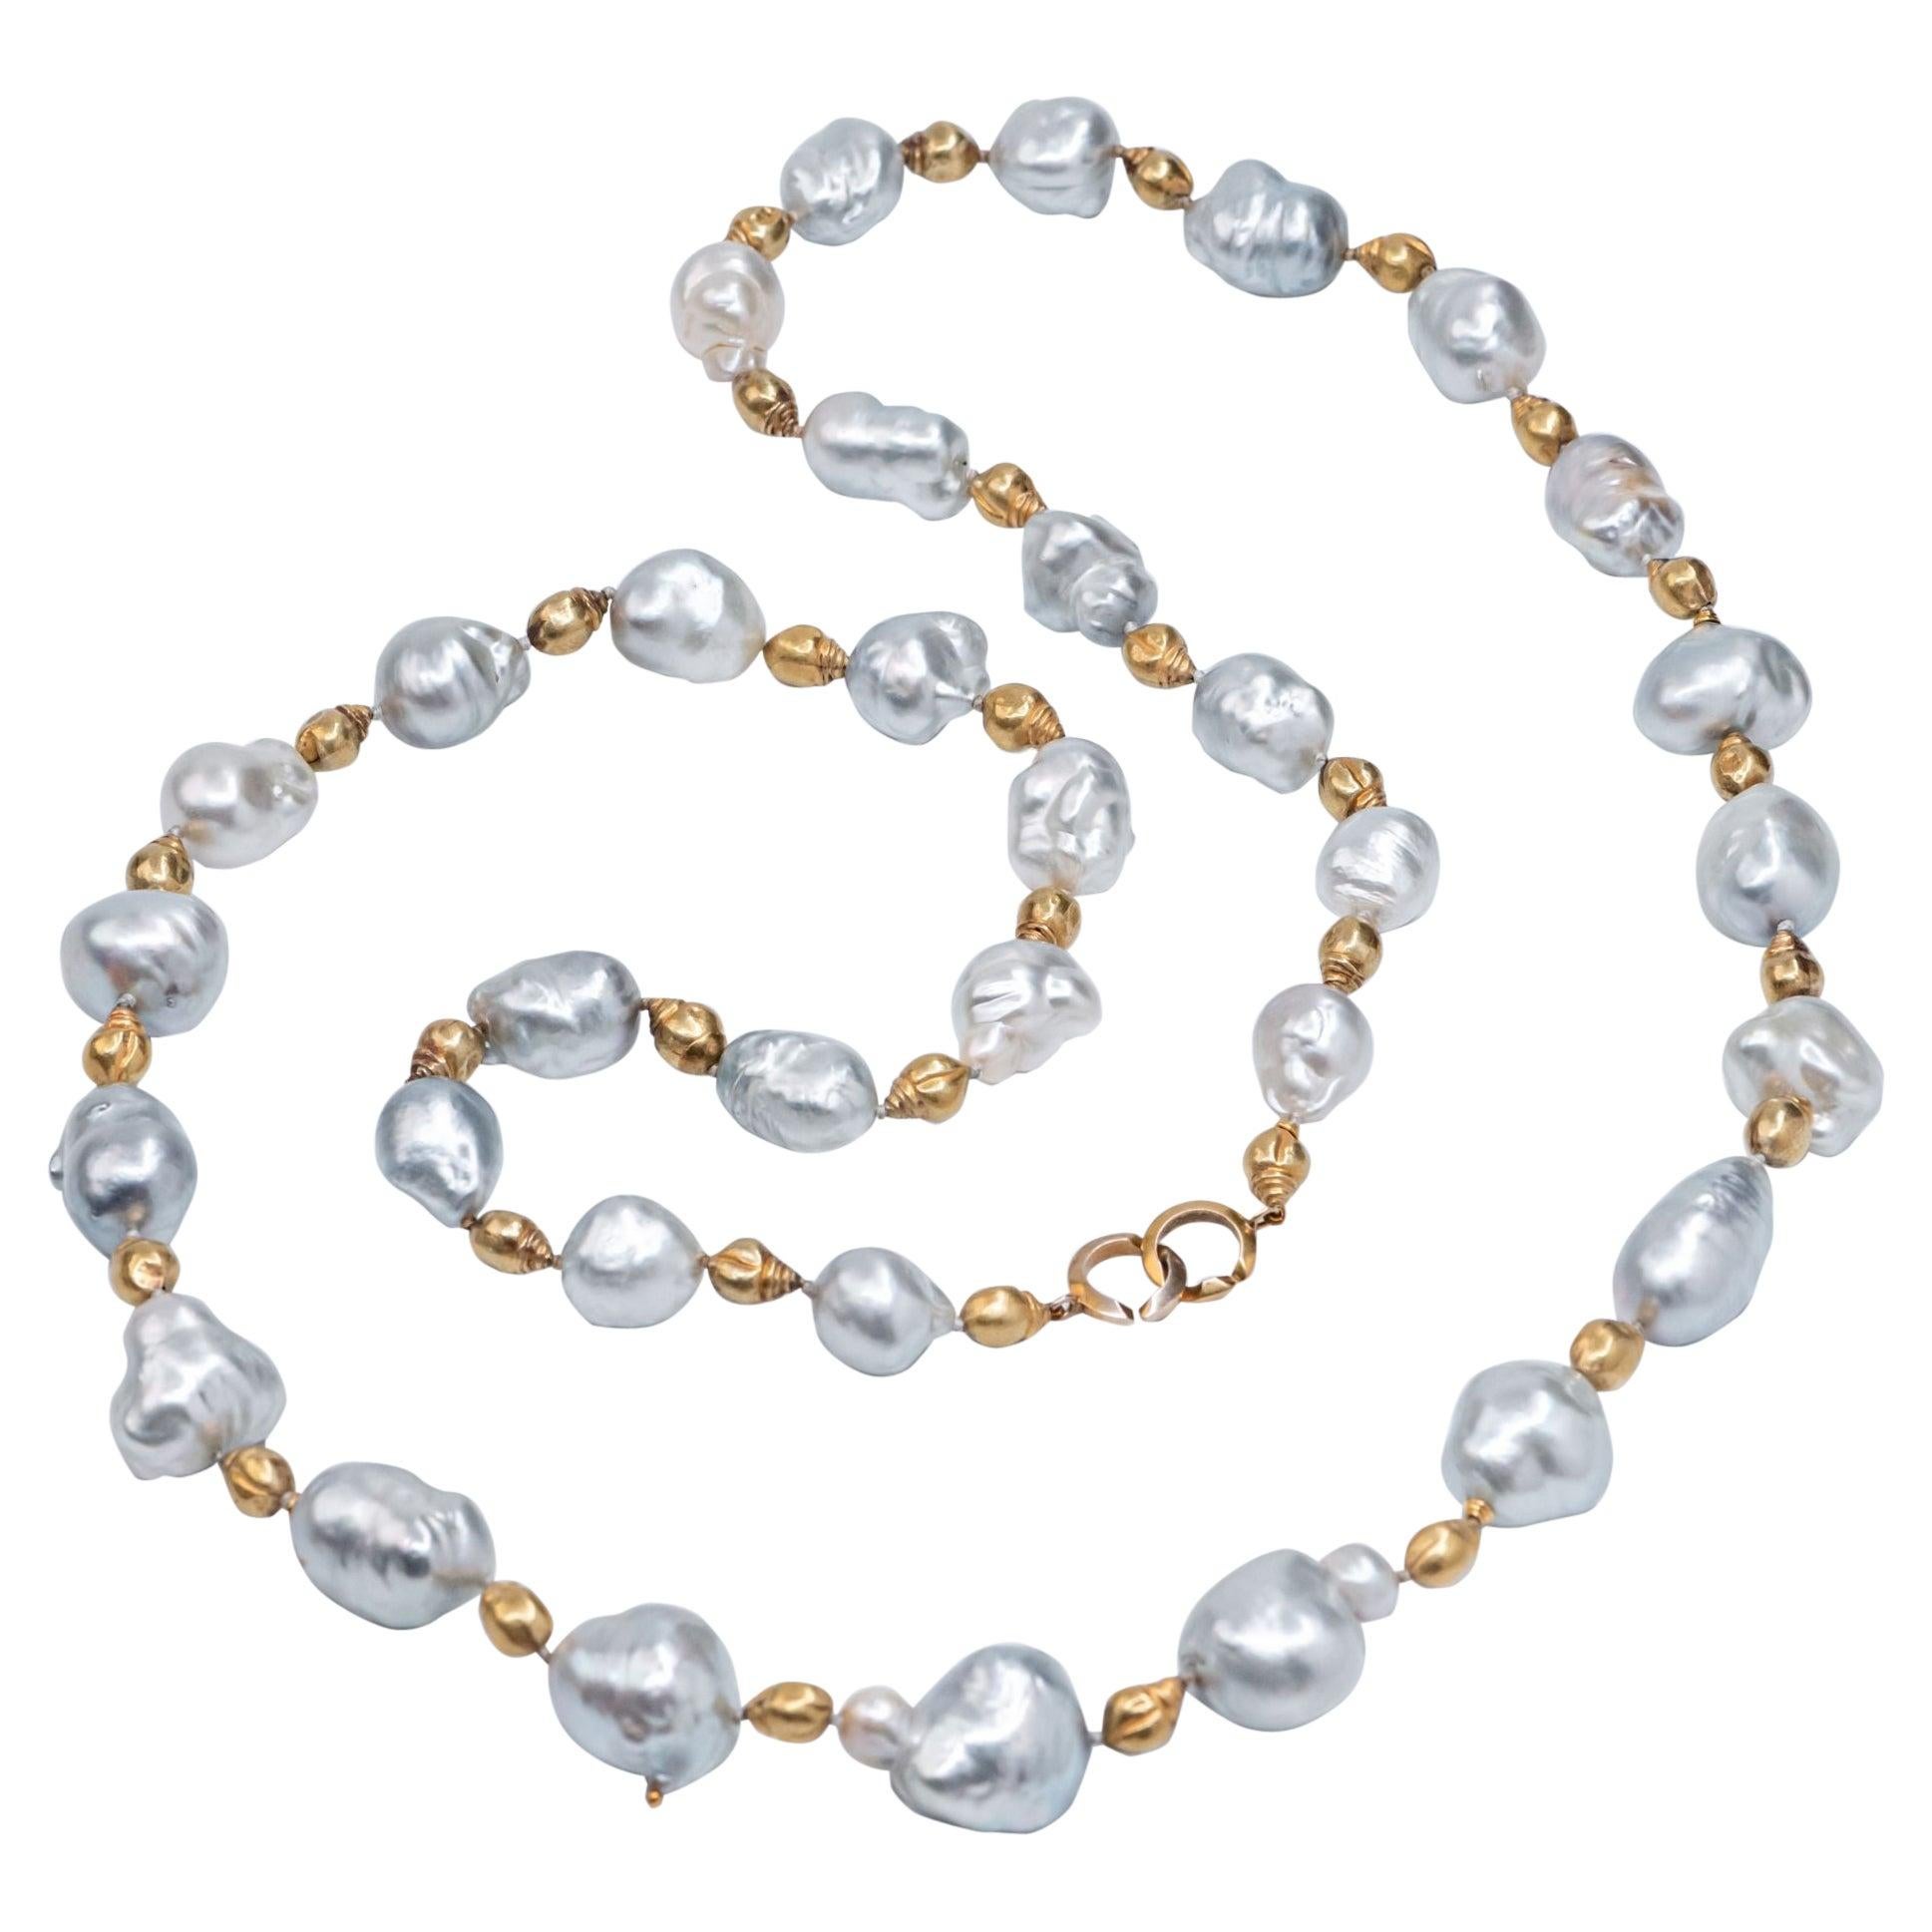 14 Century Gold Beads Oversized Blueish Baroque South Sea Pearls Beaded Necklace For Sale